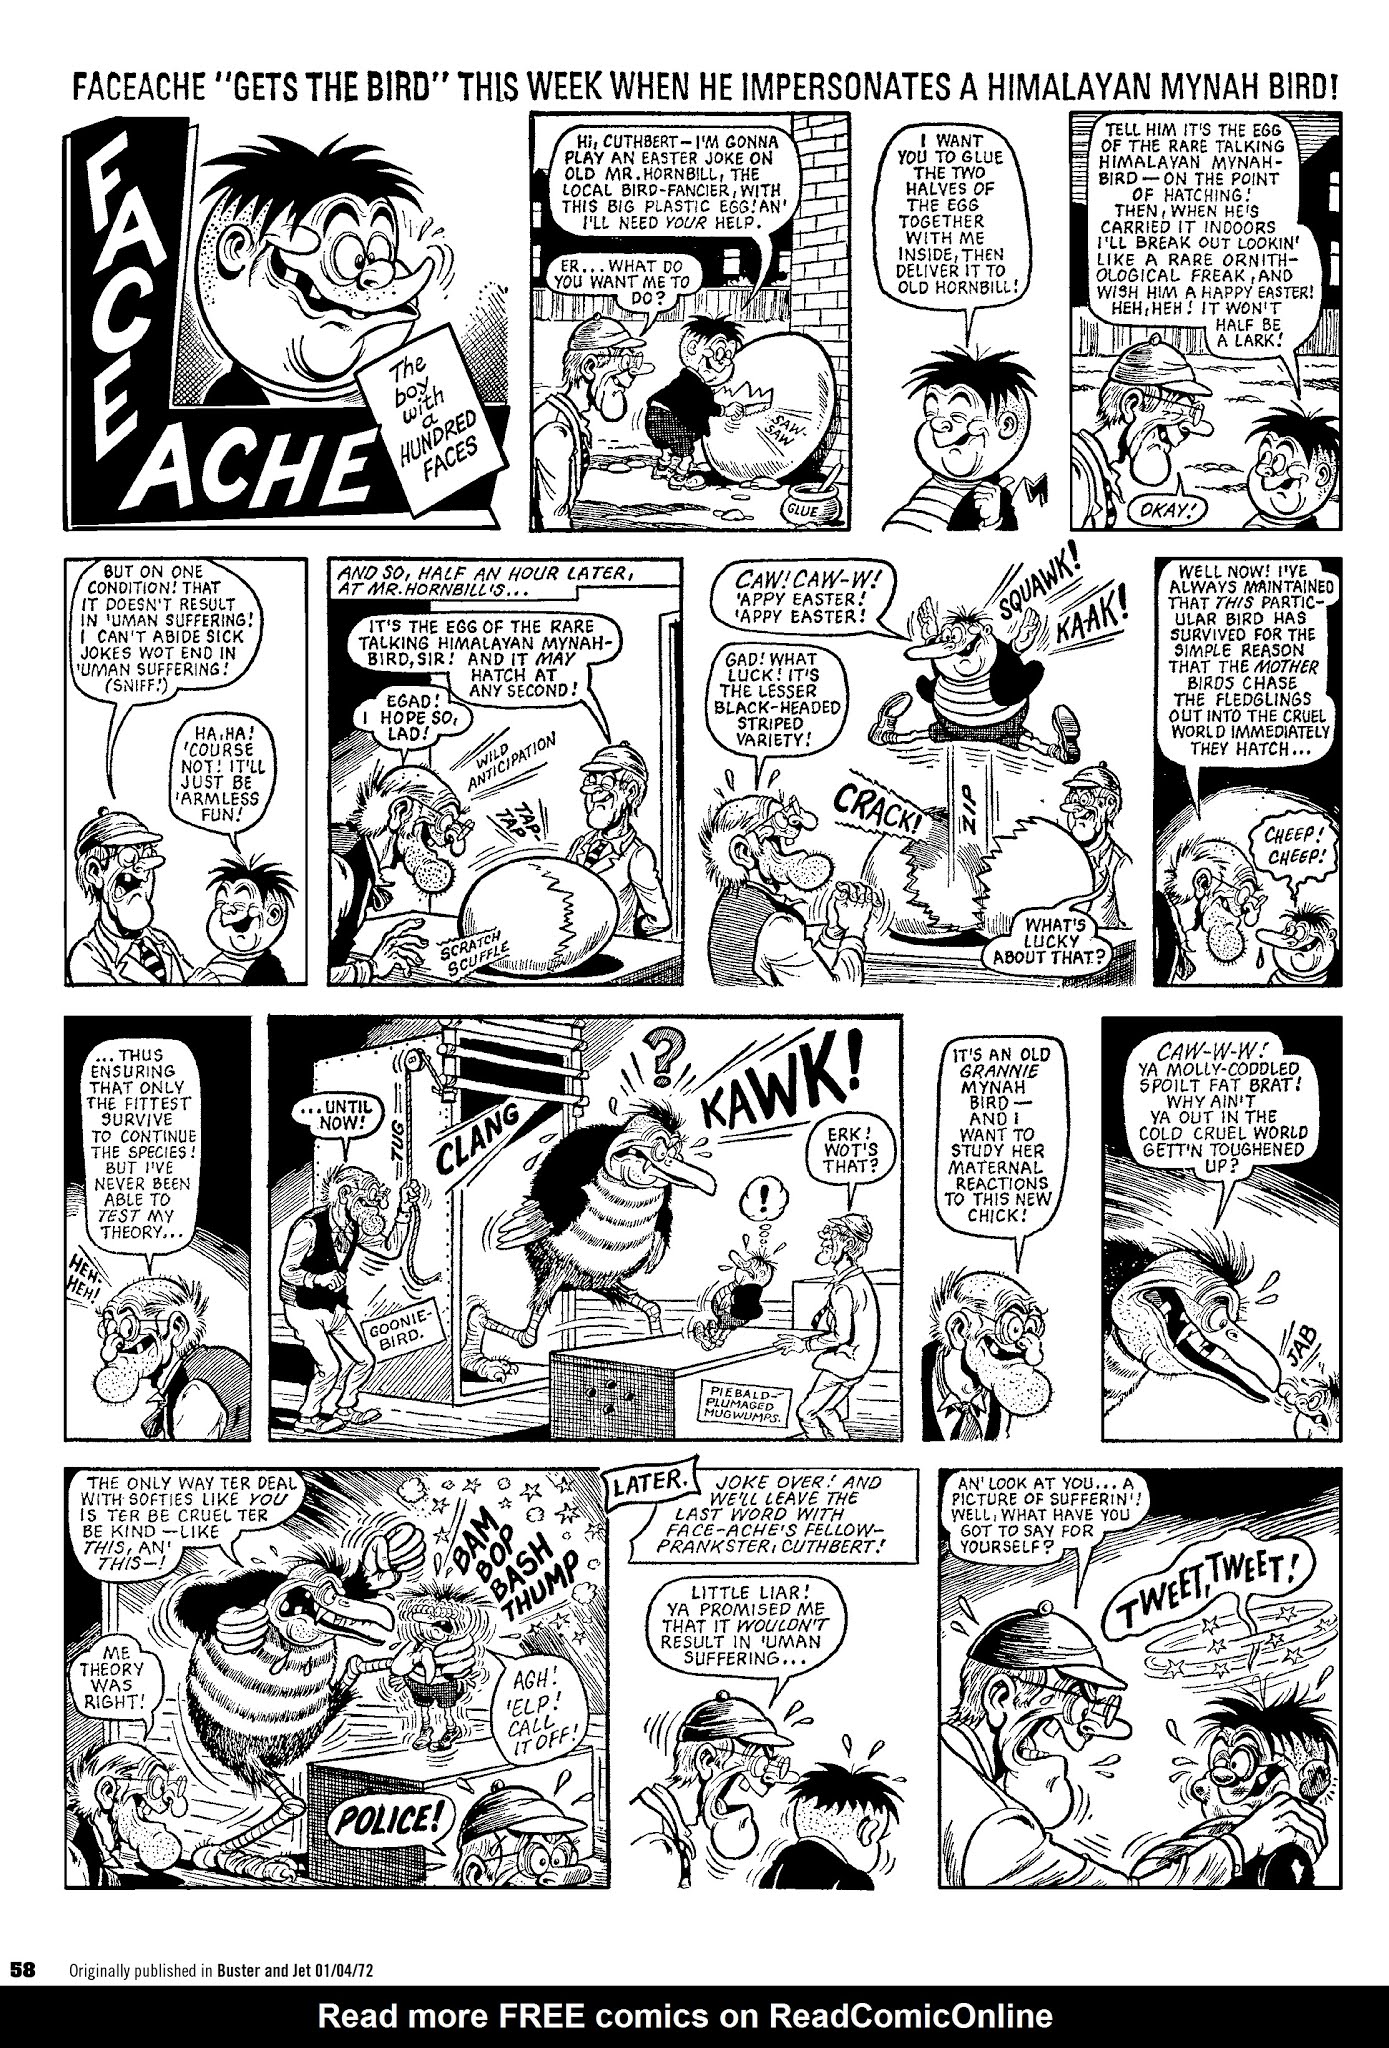 Read online Faceache: The First Hundred Scrunges comic -  Issue # TPB 1 - 60